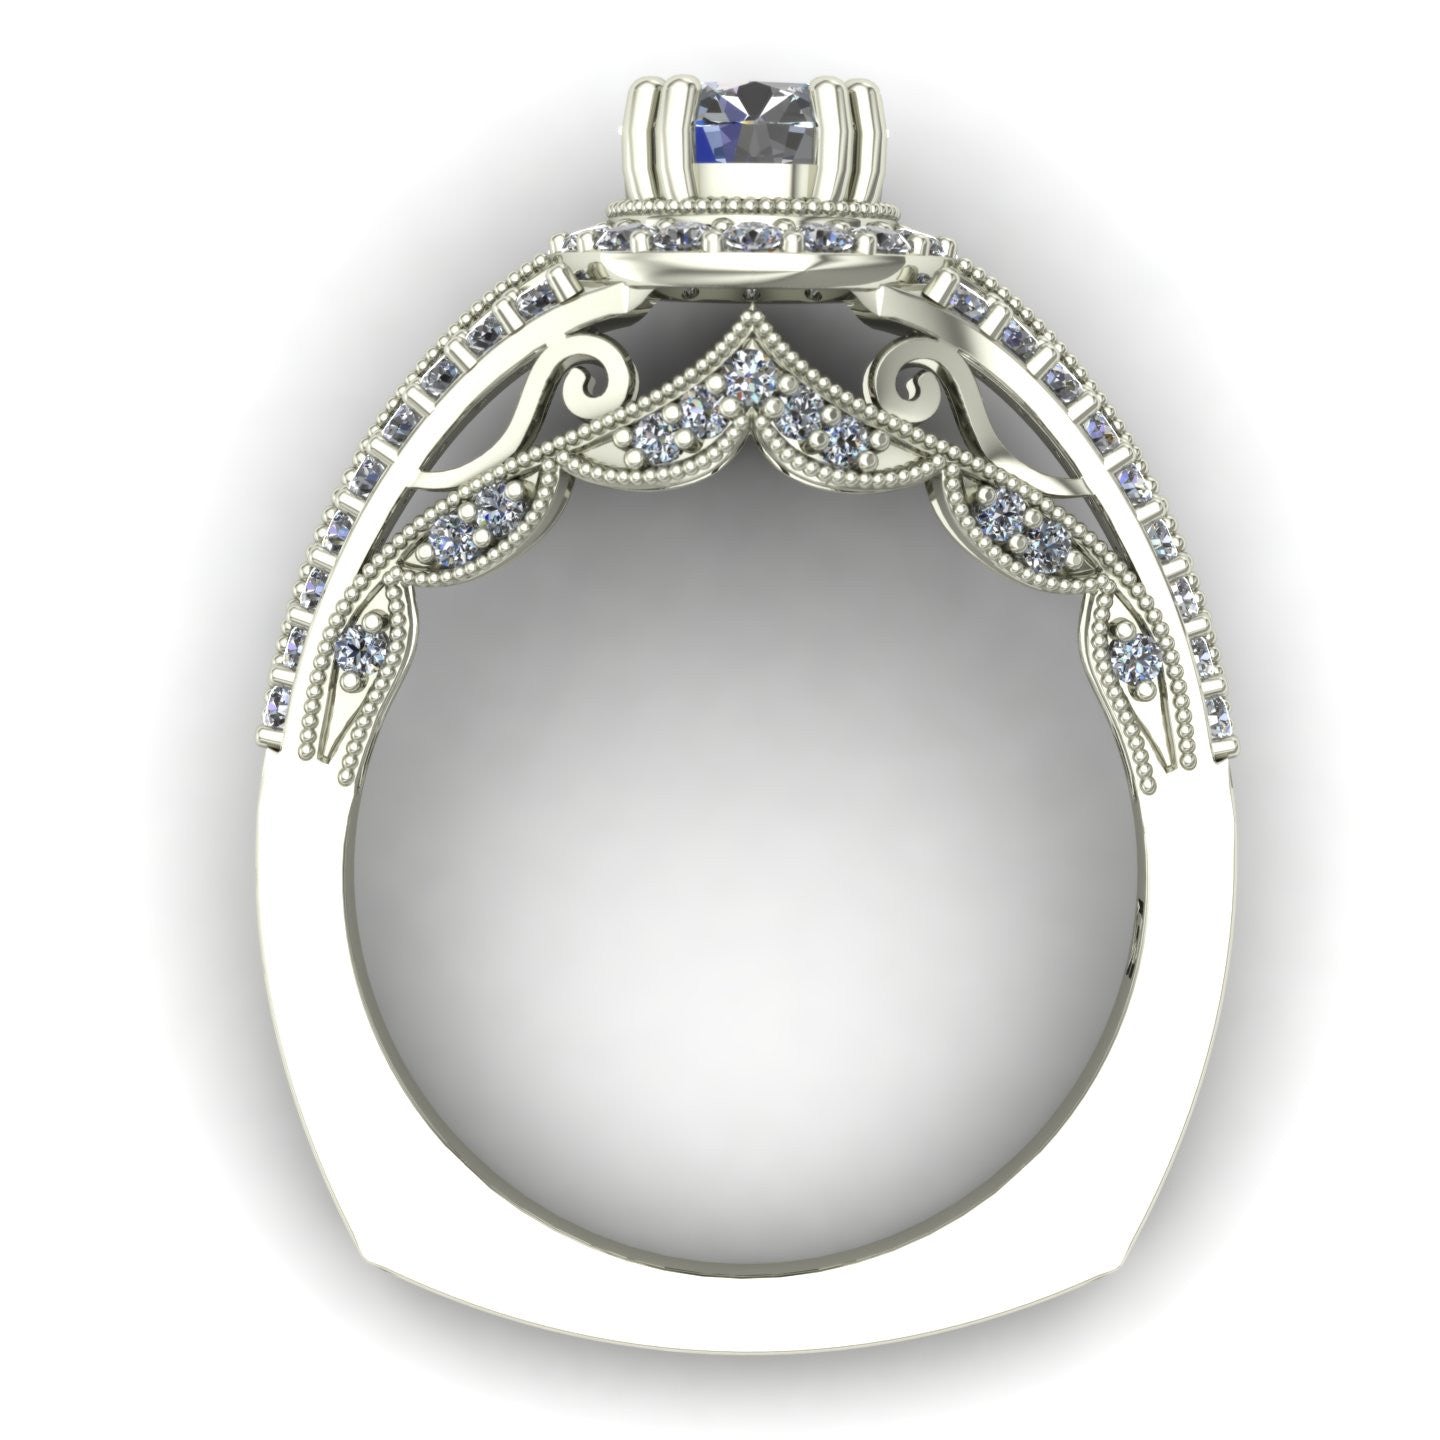 three quarter carat diamond engagement ring with scallop design in 14k white gold - Charles Babb Designs - through finger view